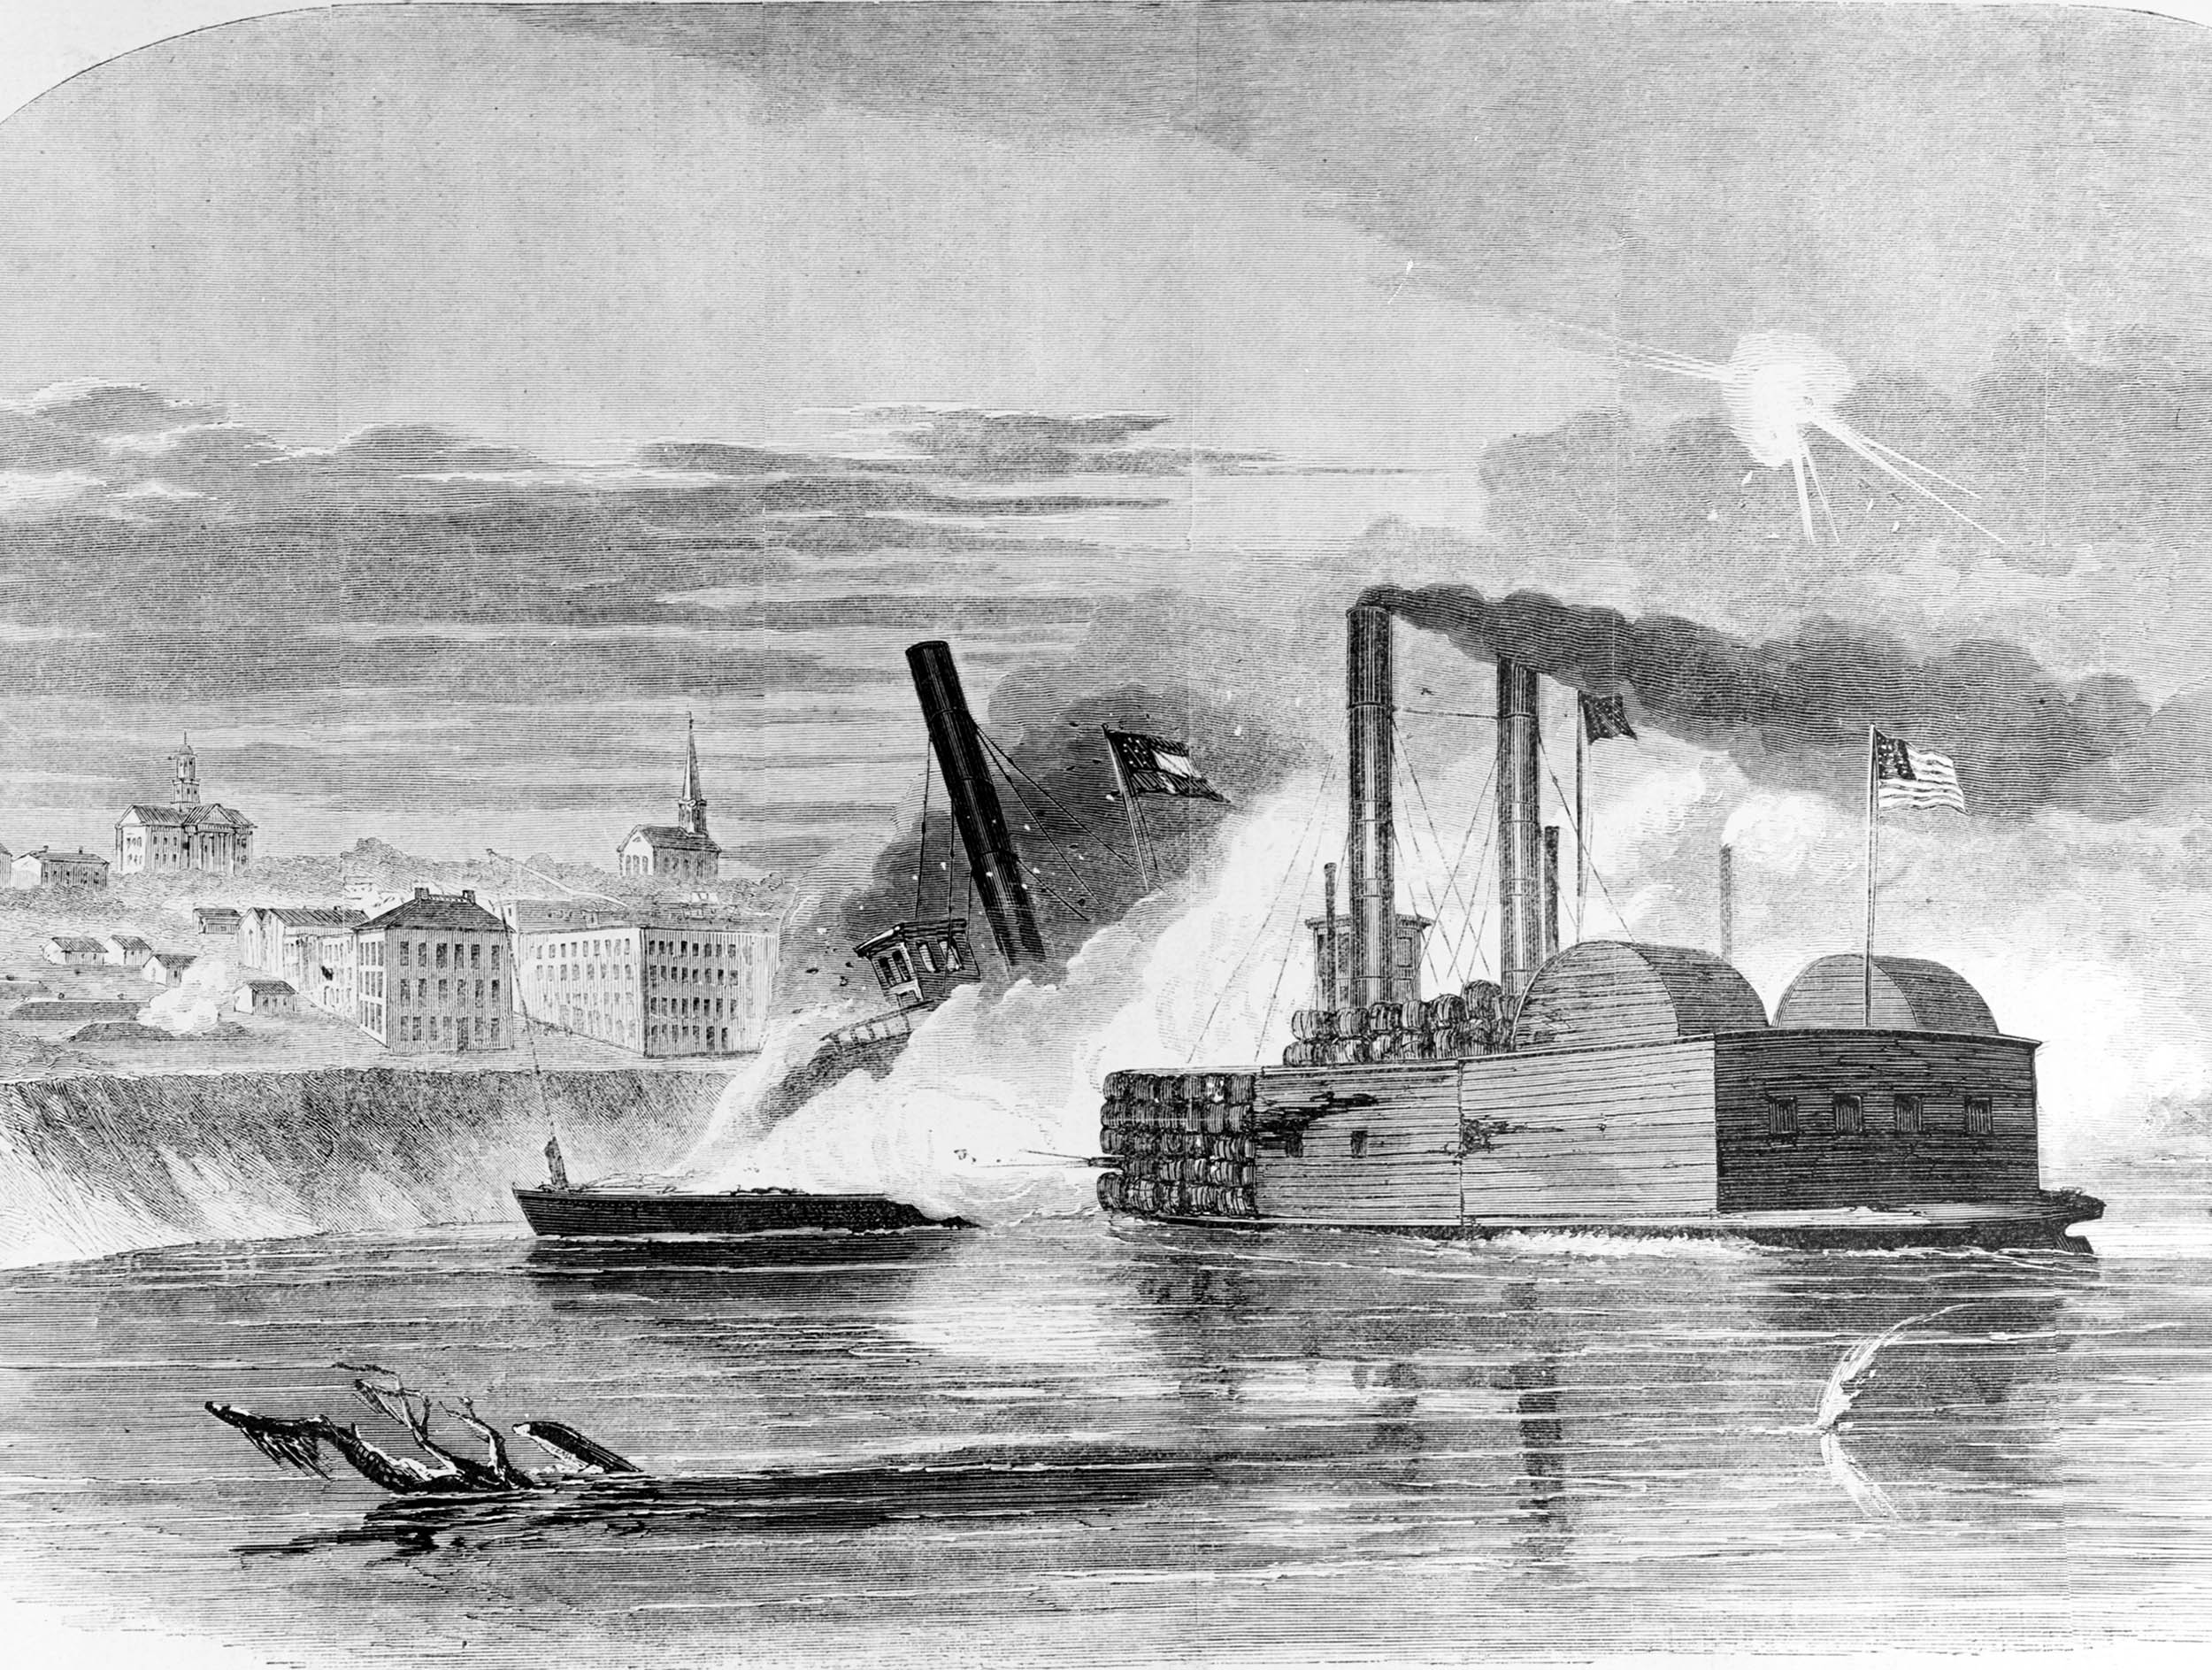 Engraving published in Harper’s Weekly in 1863 depicting attack by Federal ram USS Queen of the West on Confederate steamer CSS Vicksburg, off Vicksburg, Mississippi, February 2, 1863 (Naval History and Heritage Command)